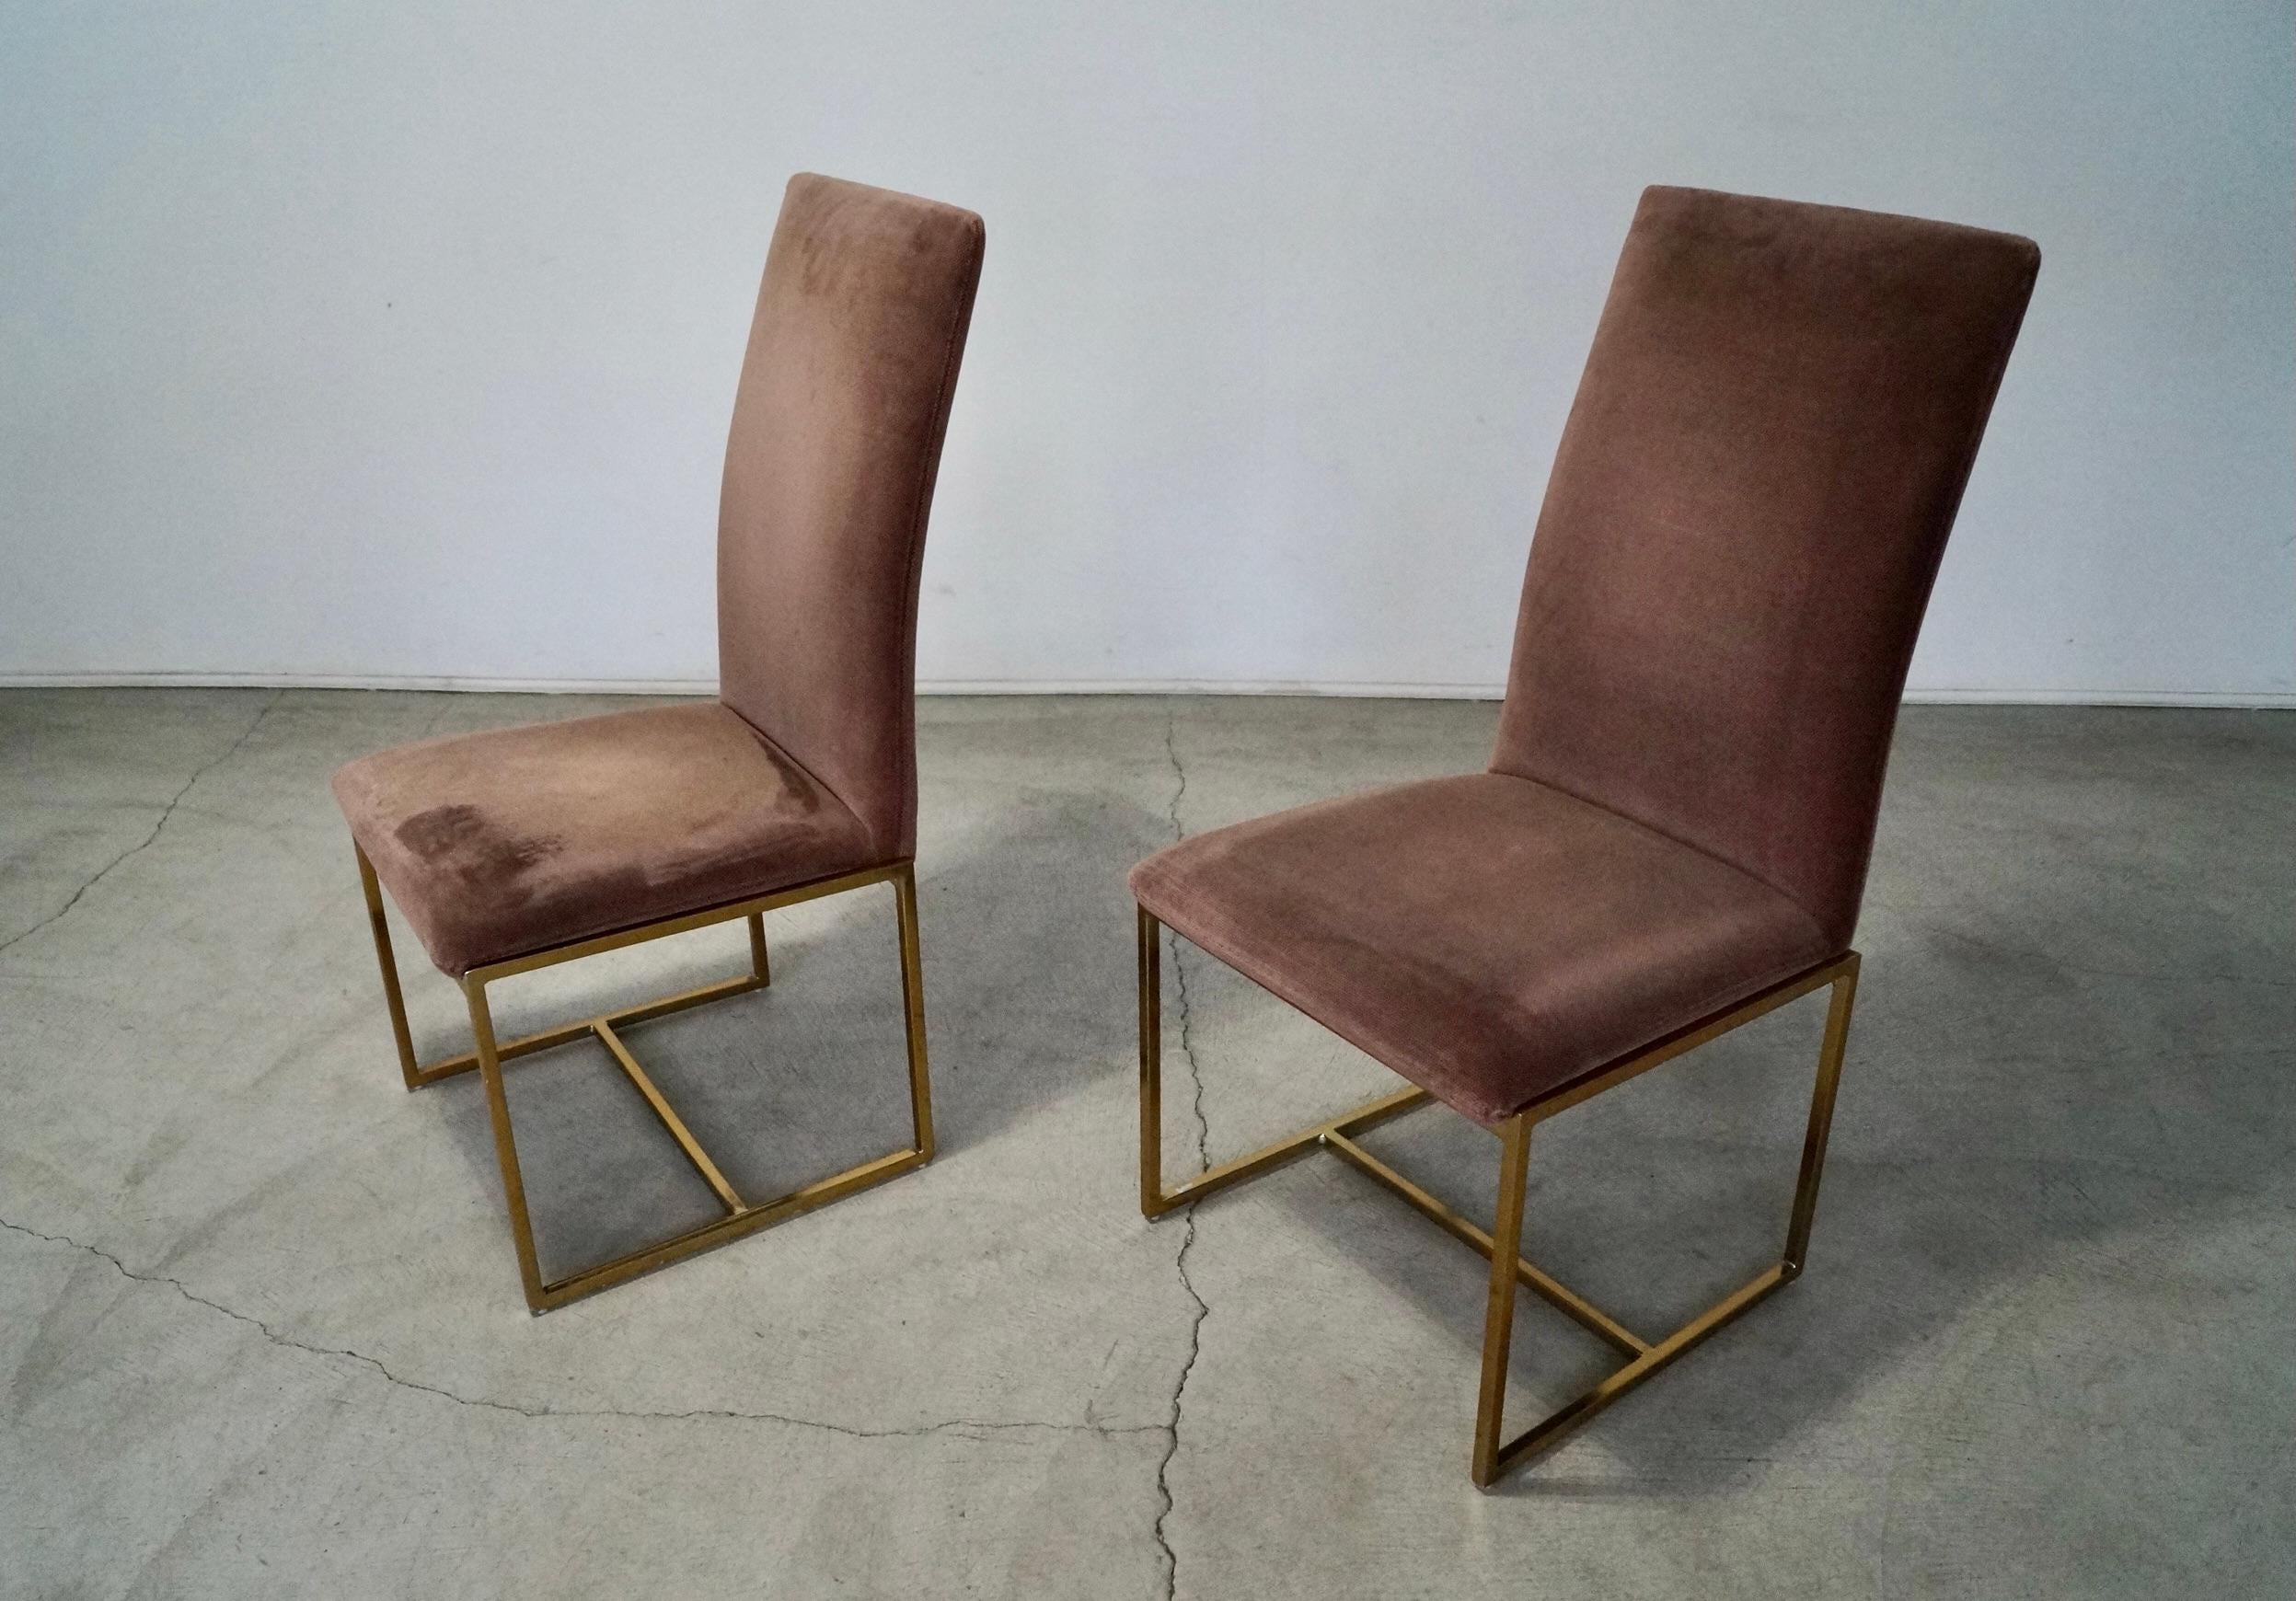 1970's Mid-Century Modern Milo Baughman Style Brass Dining Chairs - a Pair For Sale 4